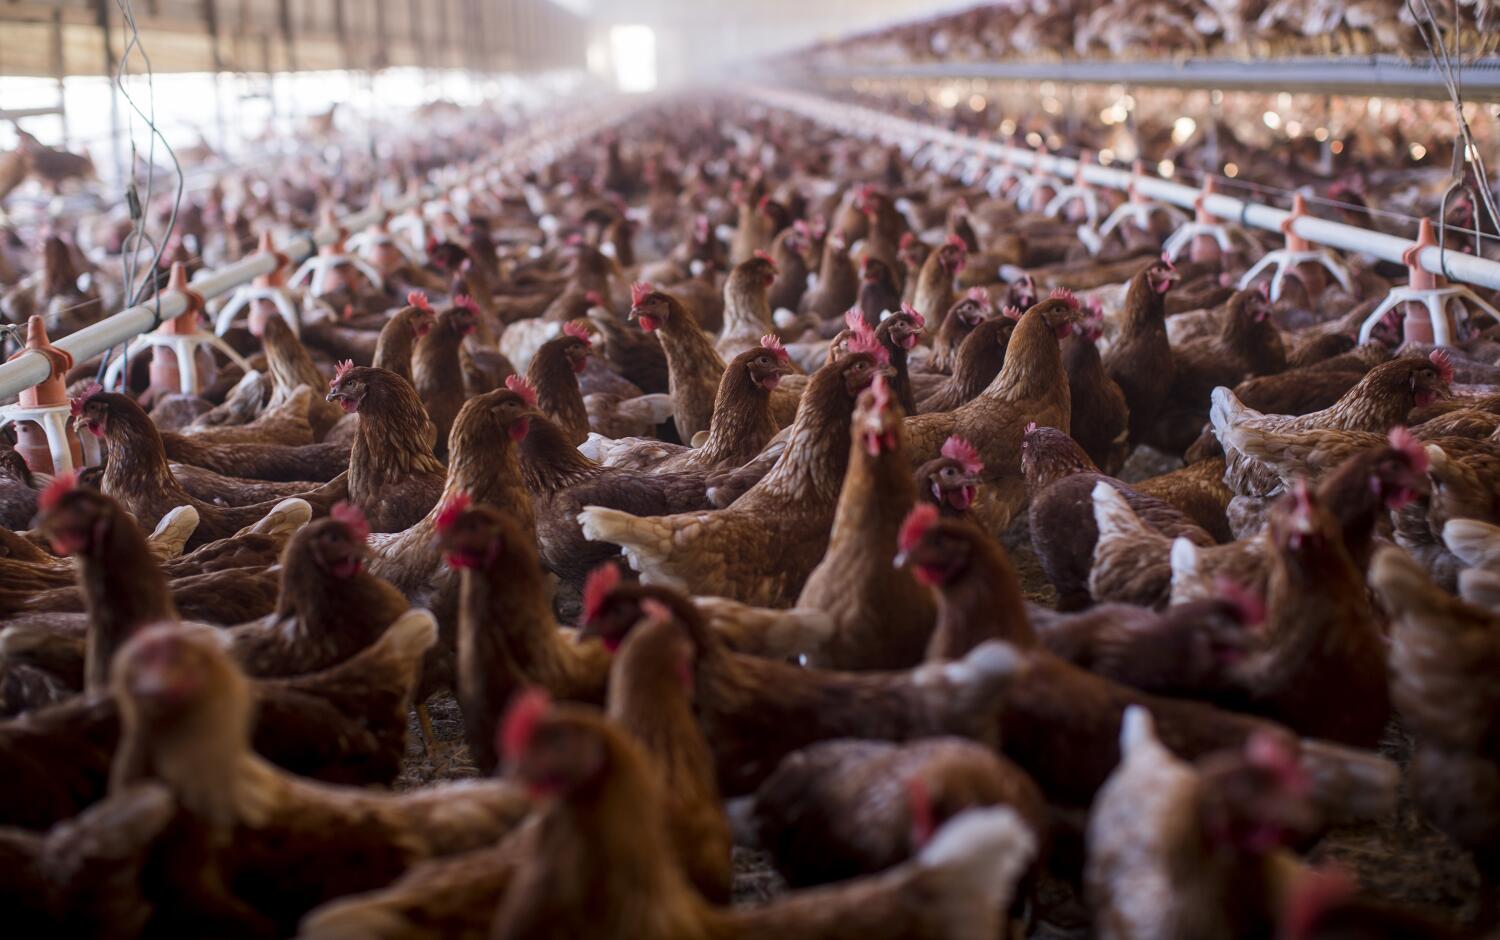 Image for display with article titled Avian Flu Outbreak Raises a Disturbing Question: Is Our Food System Built on Poop?